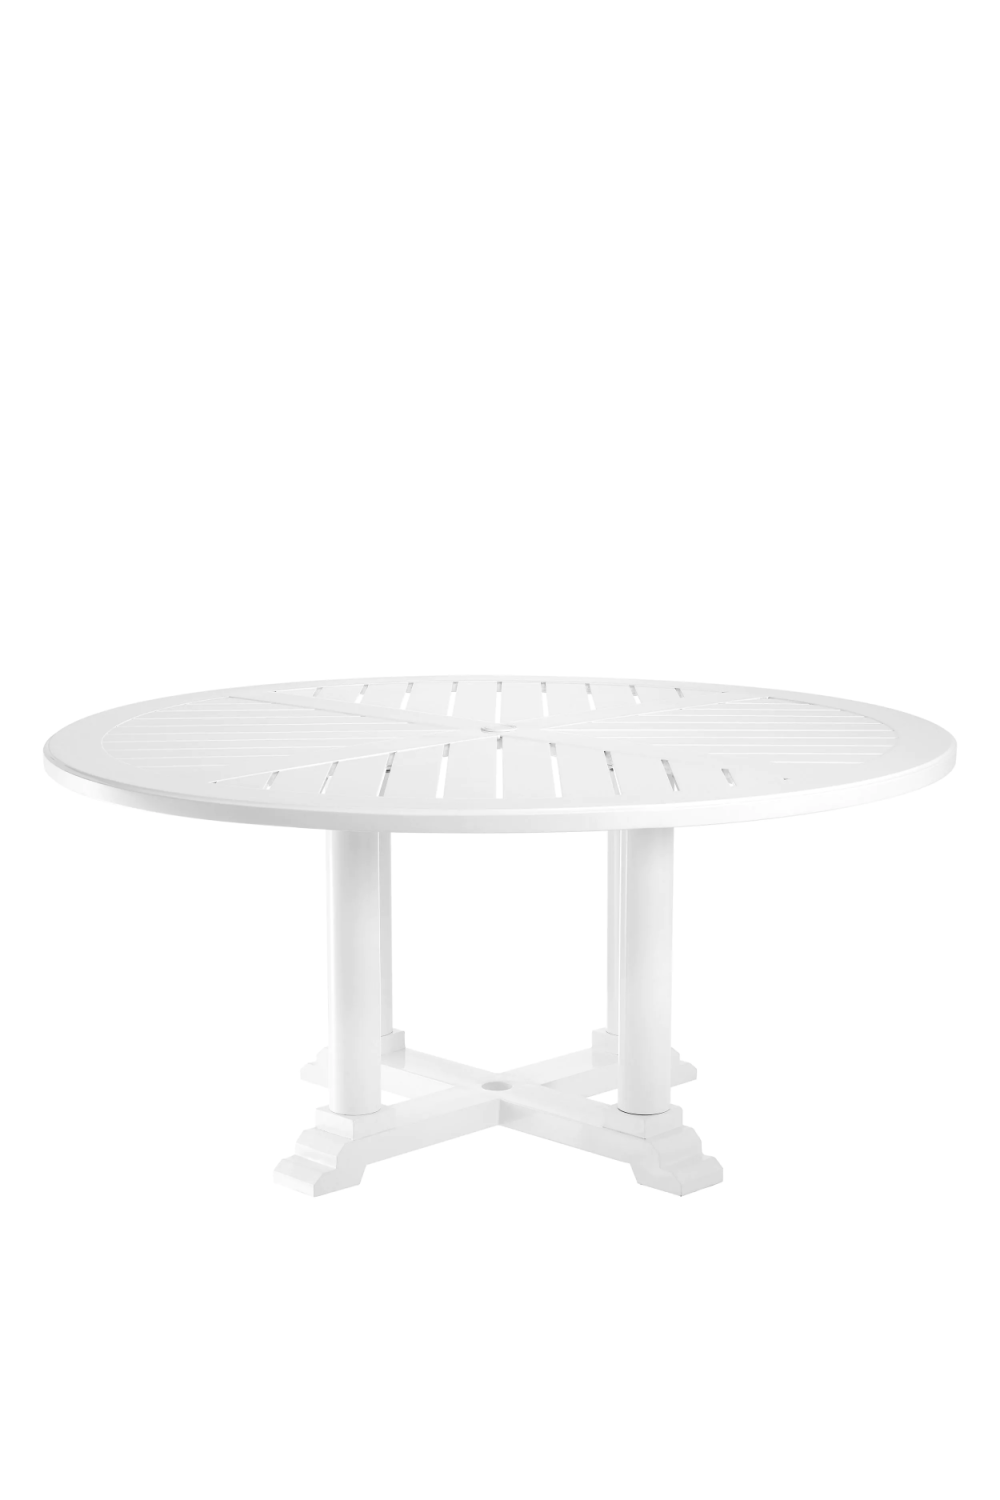 White Round Outdoor Dining Table L | Eichholtz Bell Rive | OROATRADE.com